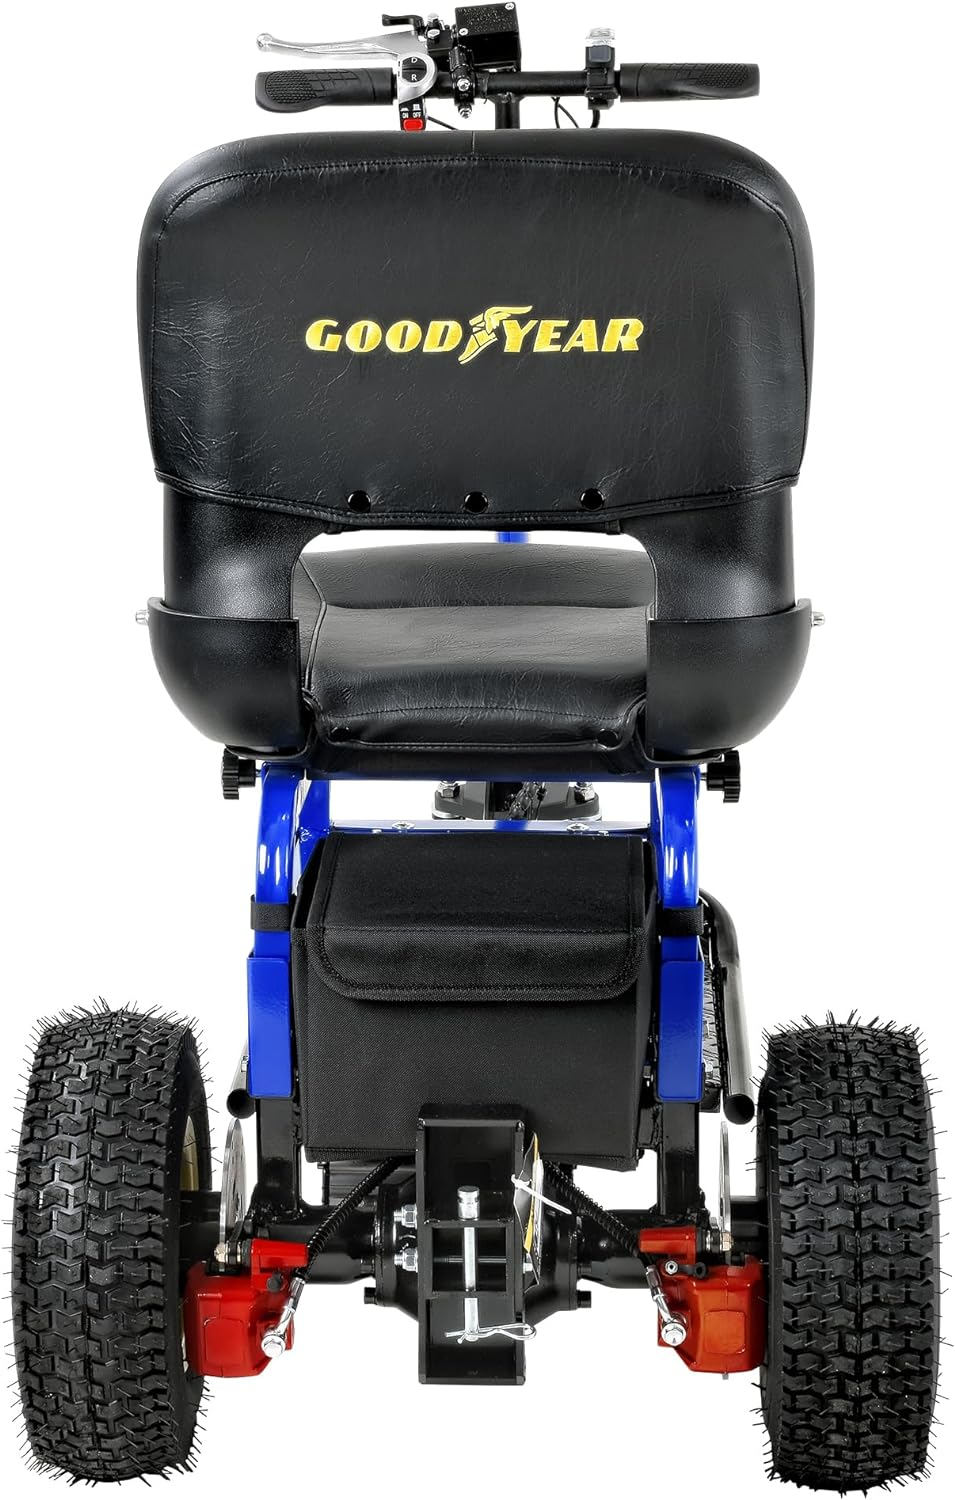 Goodyear GUO106 Tugger Electric Utility Tow Cart 12V 9Ah 500W Brushless Motor 2600 lbs Towing Capacity 350 lbs Riding Capacity New